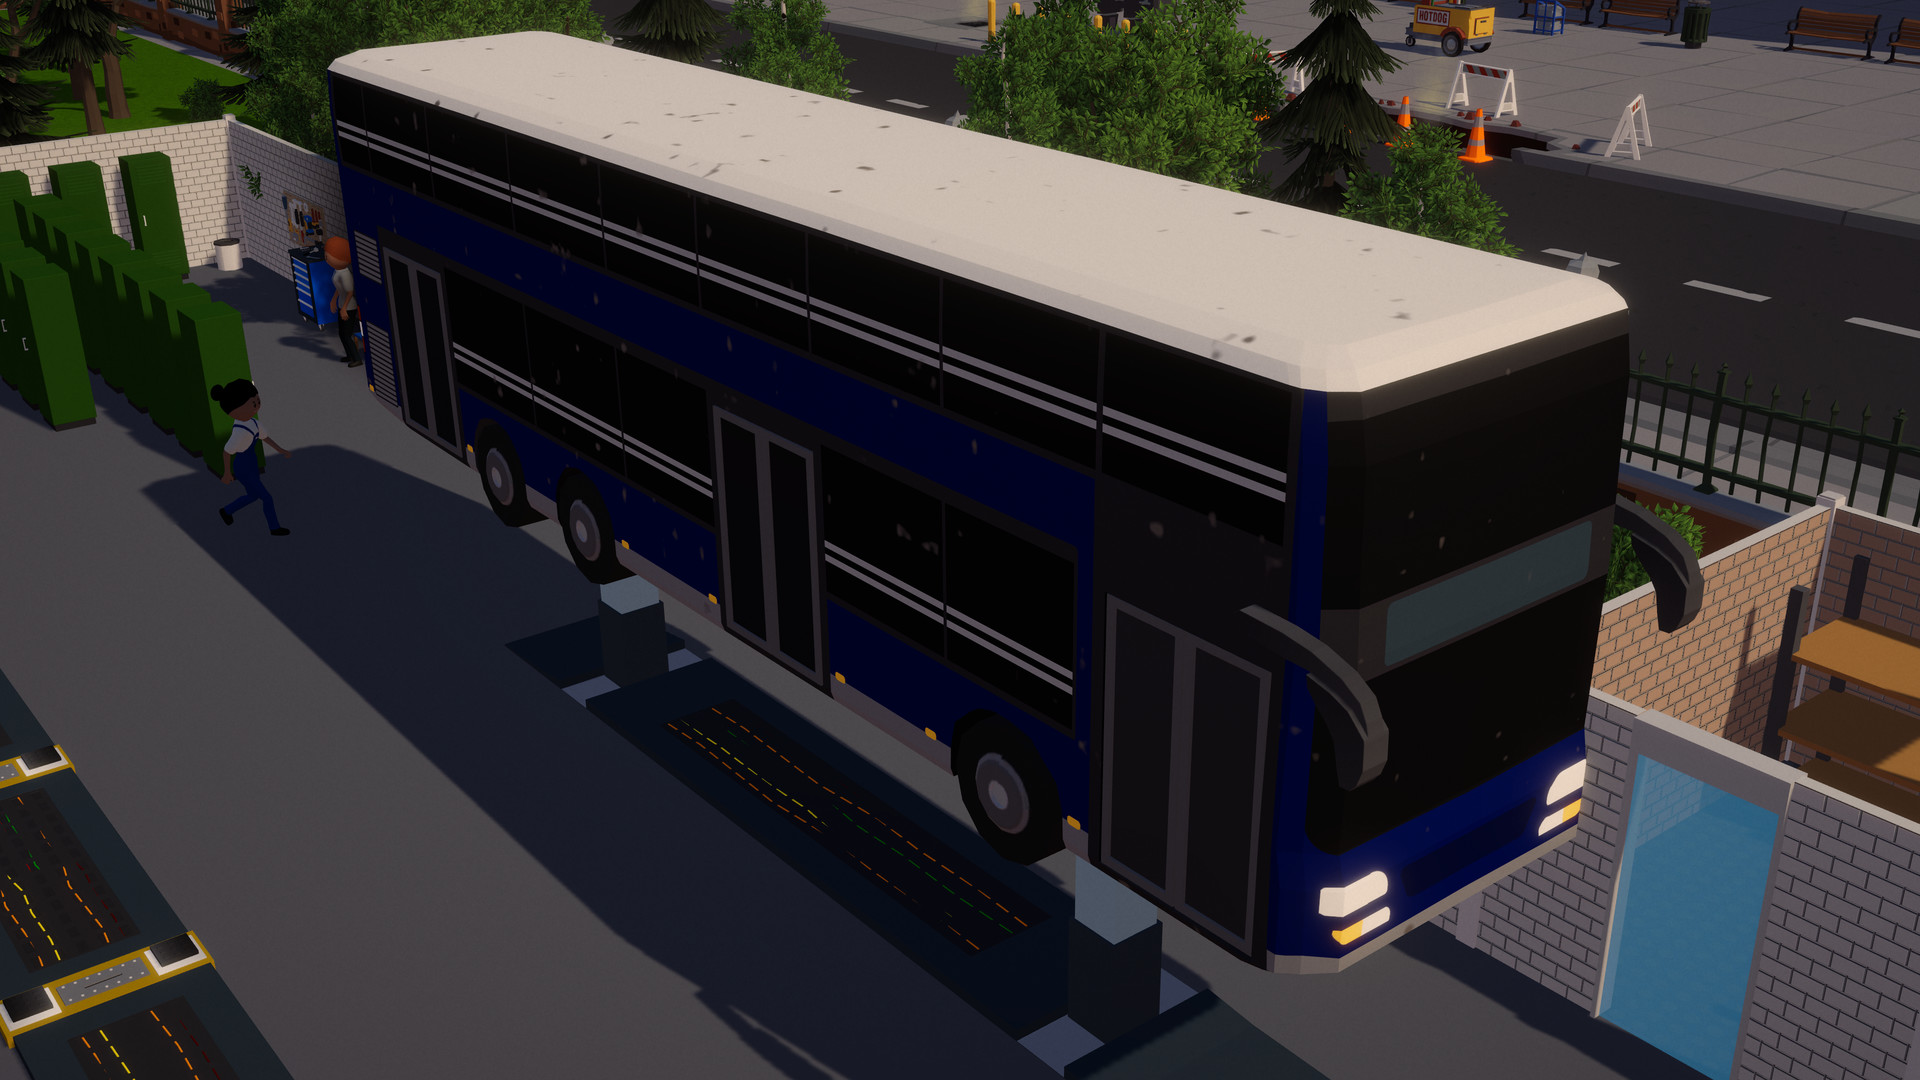 City Bus Manager Free Download